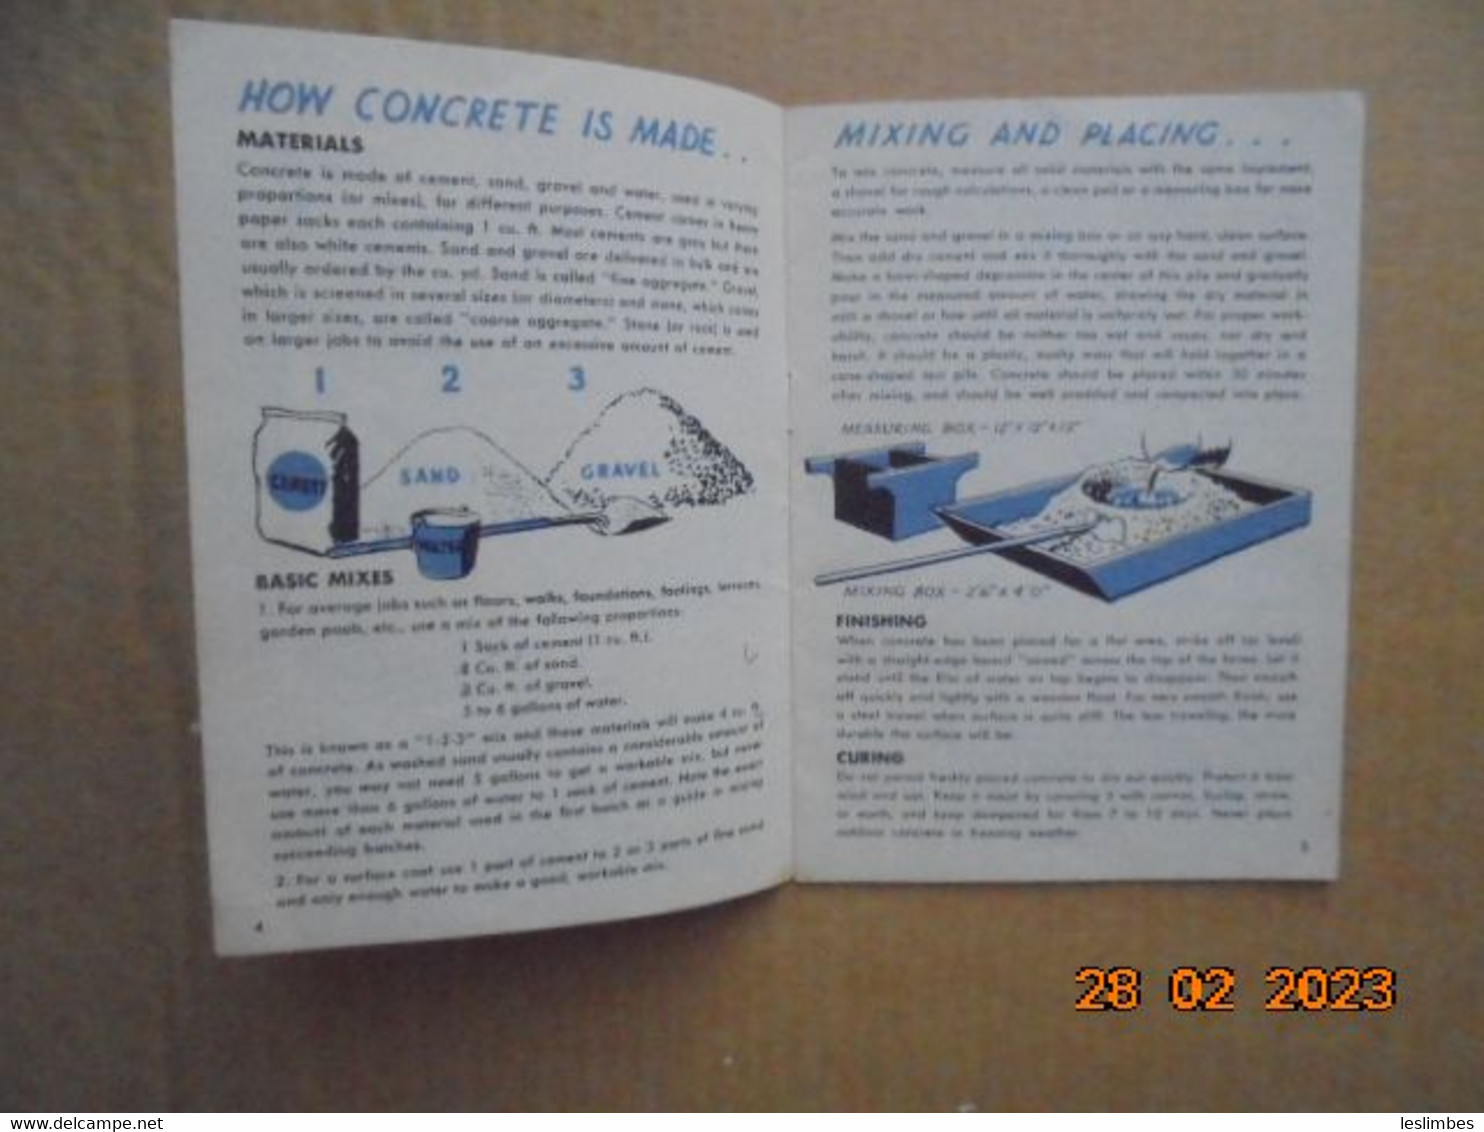 Concrete Ideas: How To Use Concrete Around The House By H. Wood. Mercer Publishing Co. 1953 - Heimwerken